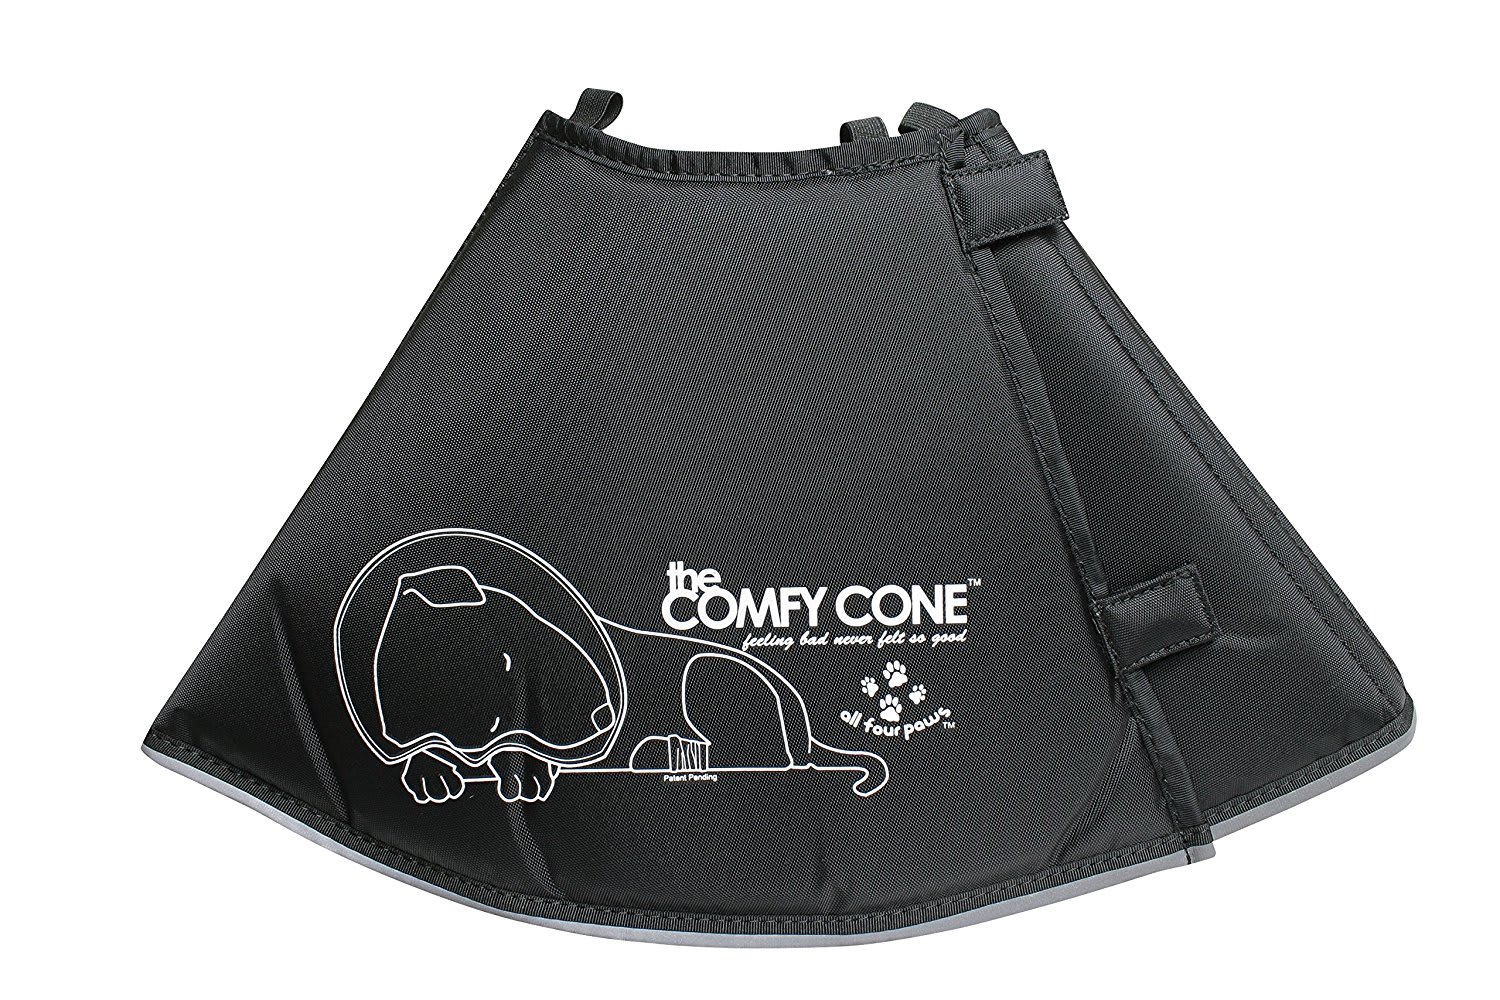 All Four Paws Comfy Cone Black Soft e-Collar with Removable Stays for Dogs, Medium